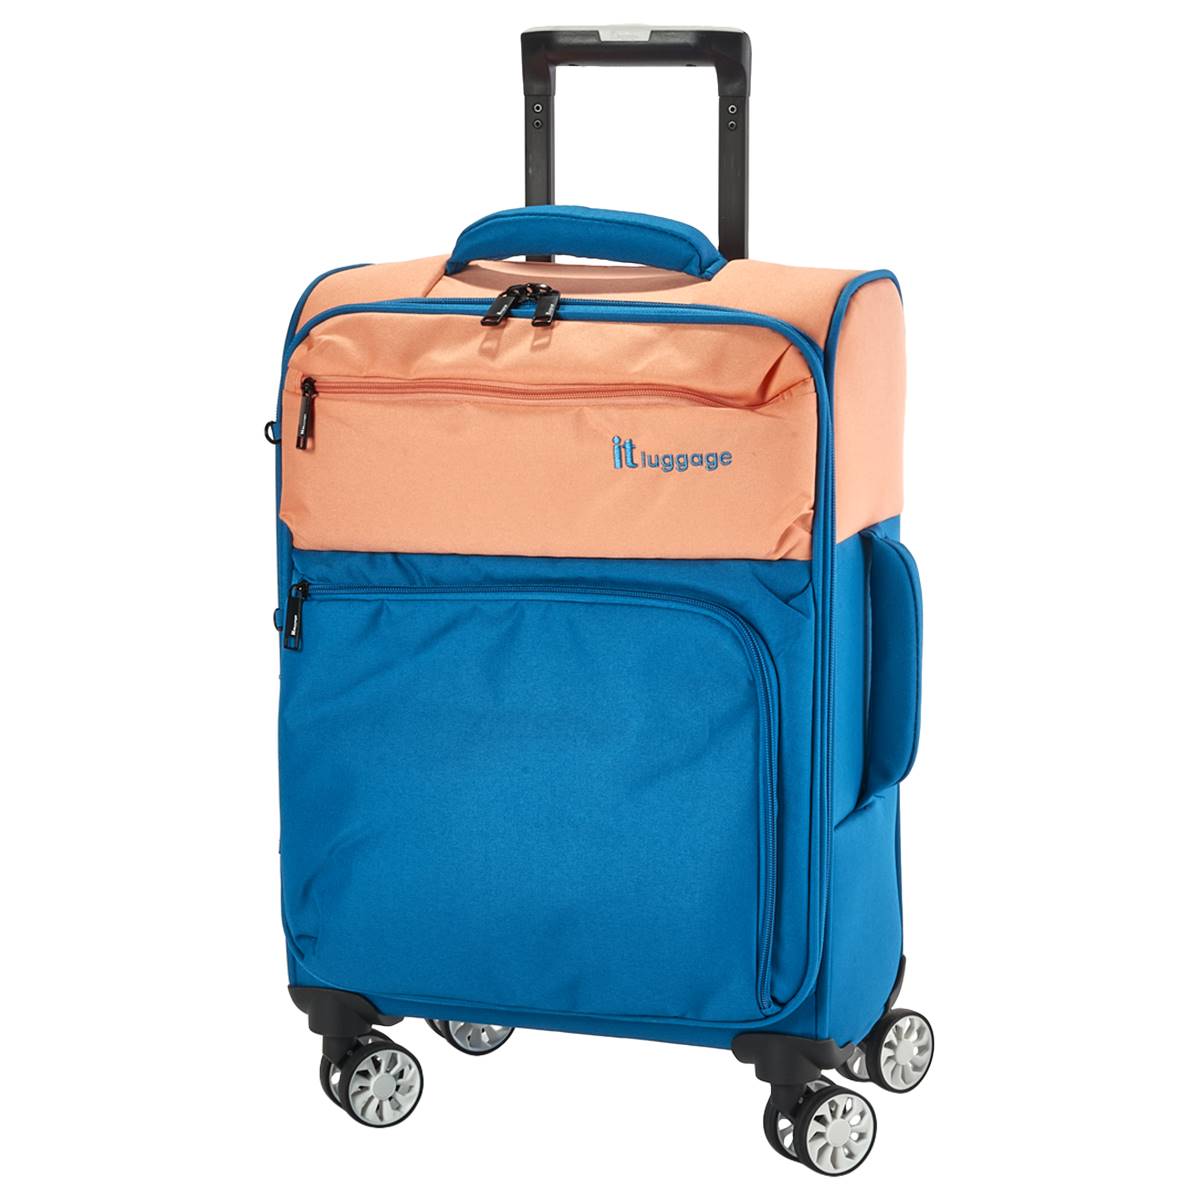 IT Luggage Duo-Tone 28in. Spinner